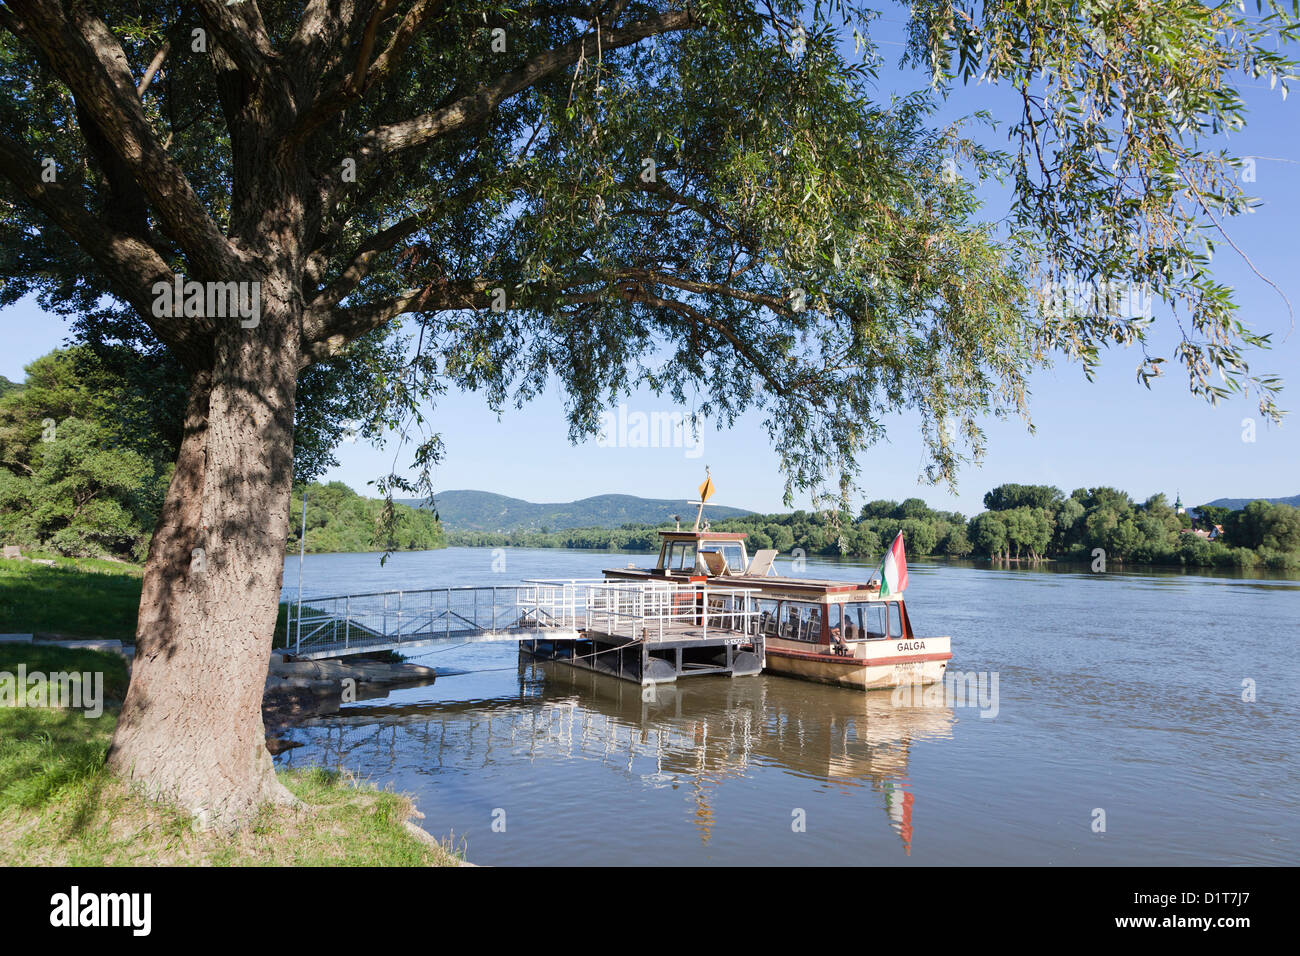 The jetty of Dunabogdany for the small ferry to the island of St. Andrew (Szentendre). Duna-Ipoly National Park. Europe, Hungary Stock Photo